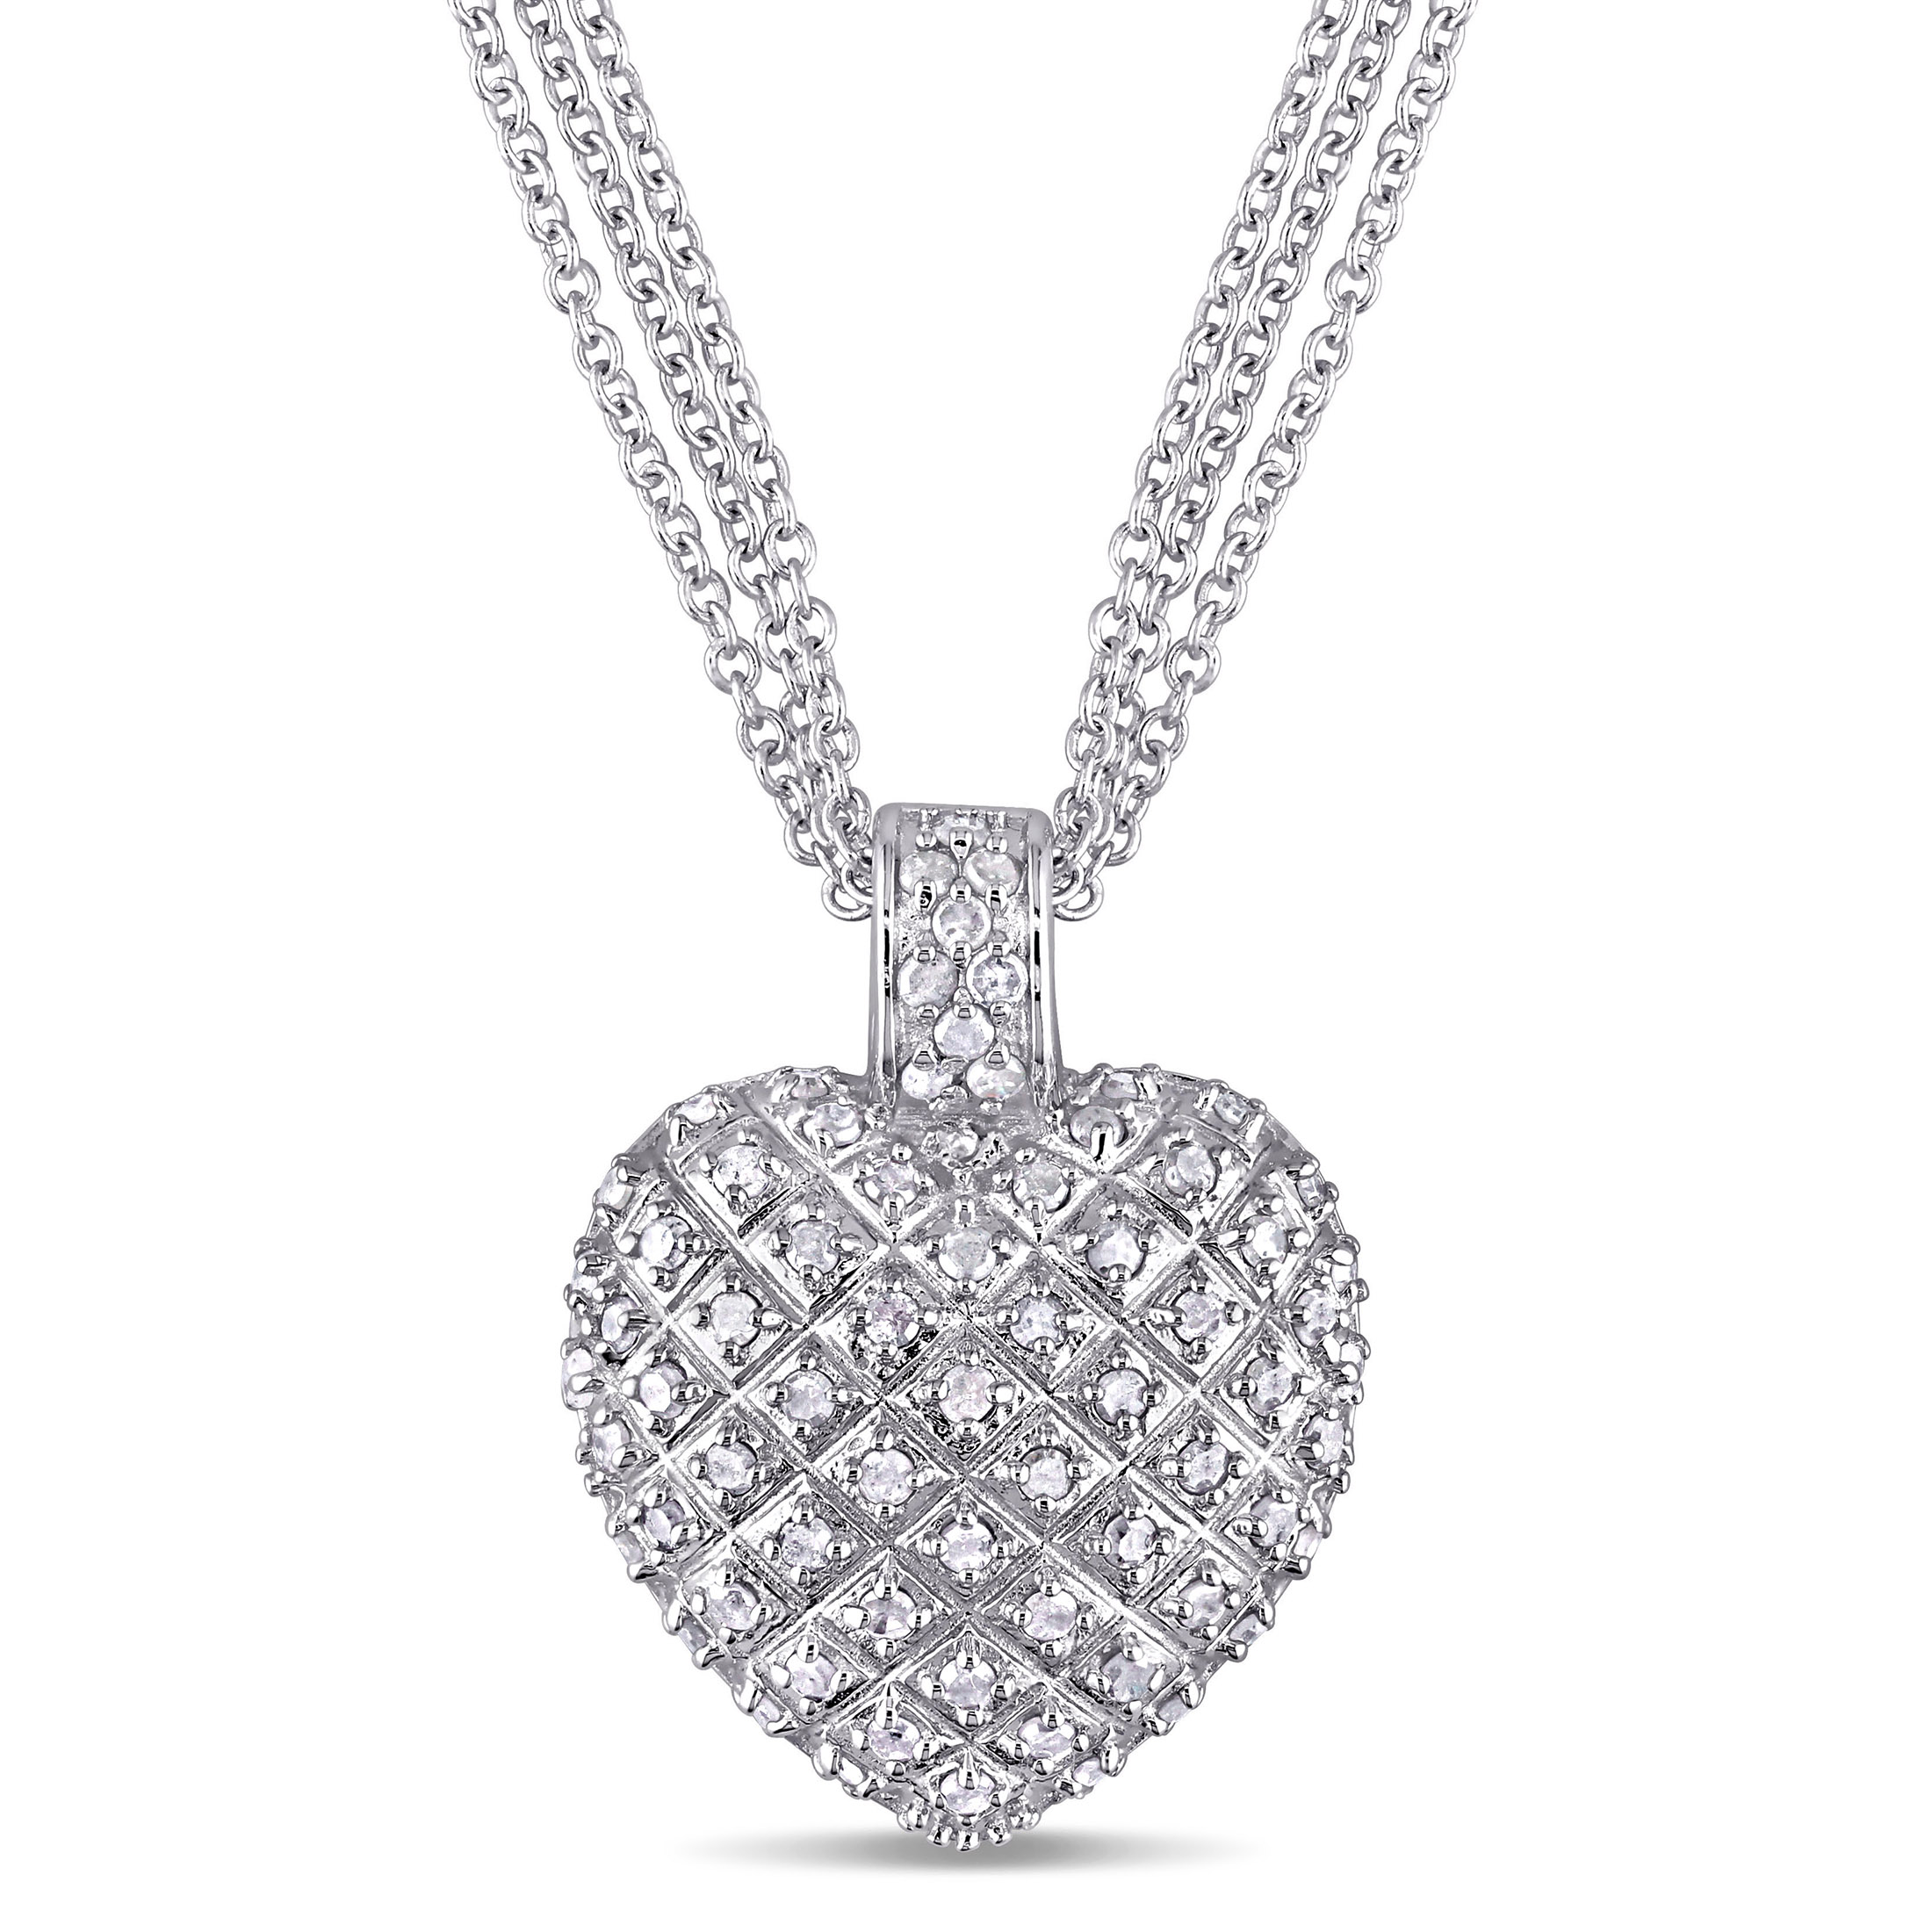 Everly Women's 1 Carat T.W. Round-Cut Diamond Sterling Silver Clustered Heart Necklace with Pave Setting and Lobster Clasp (H-I-J, I3) - 17 in. - image 1 of 8